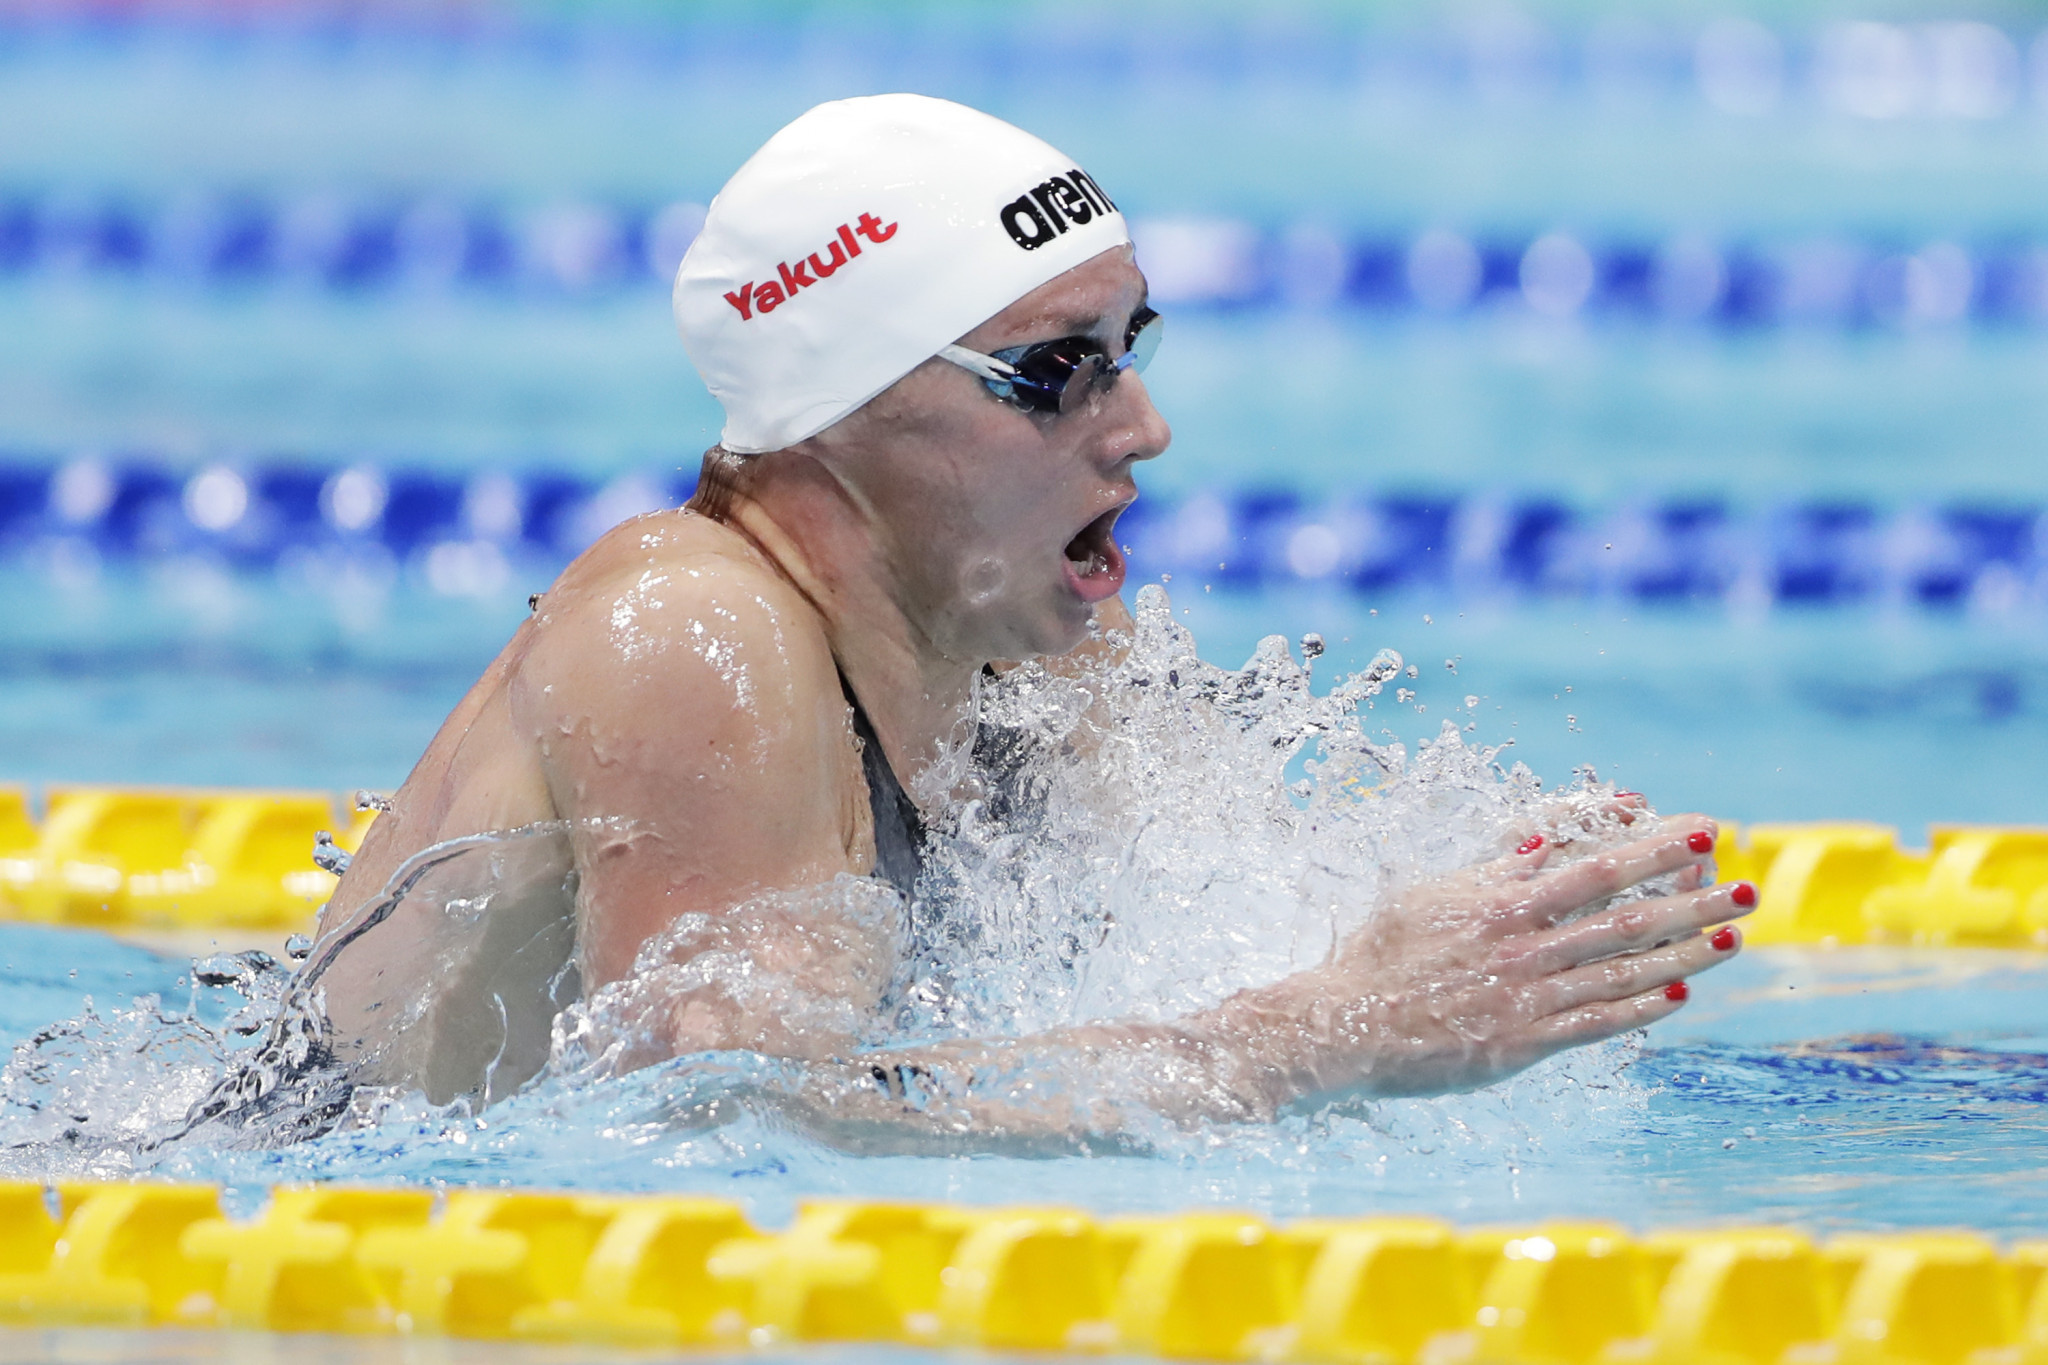 Hungary's Katinka Hosszú set an FINA World Cup record in the women's 400m individual medley ©Getty Images